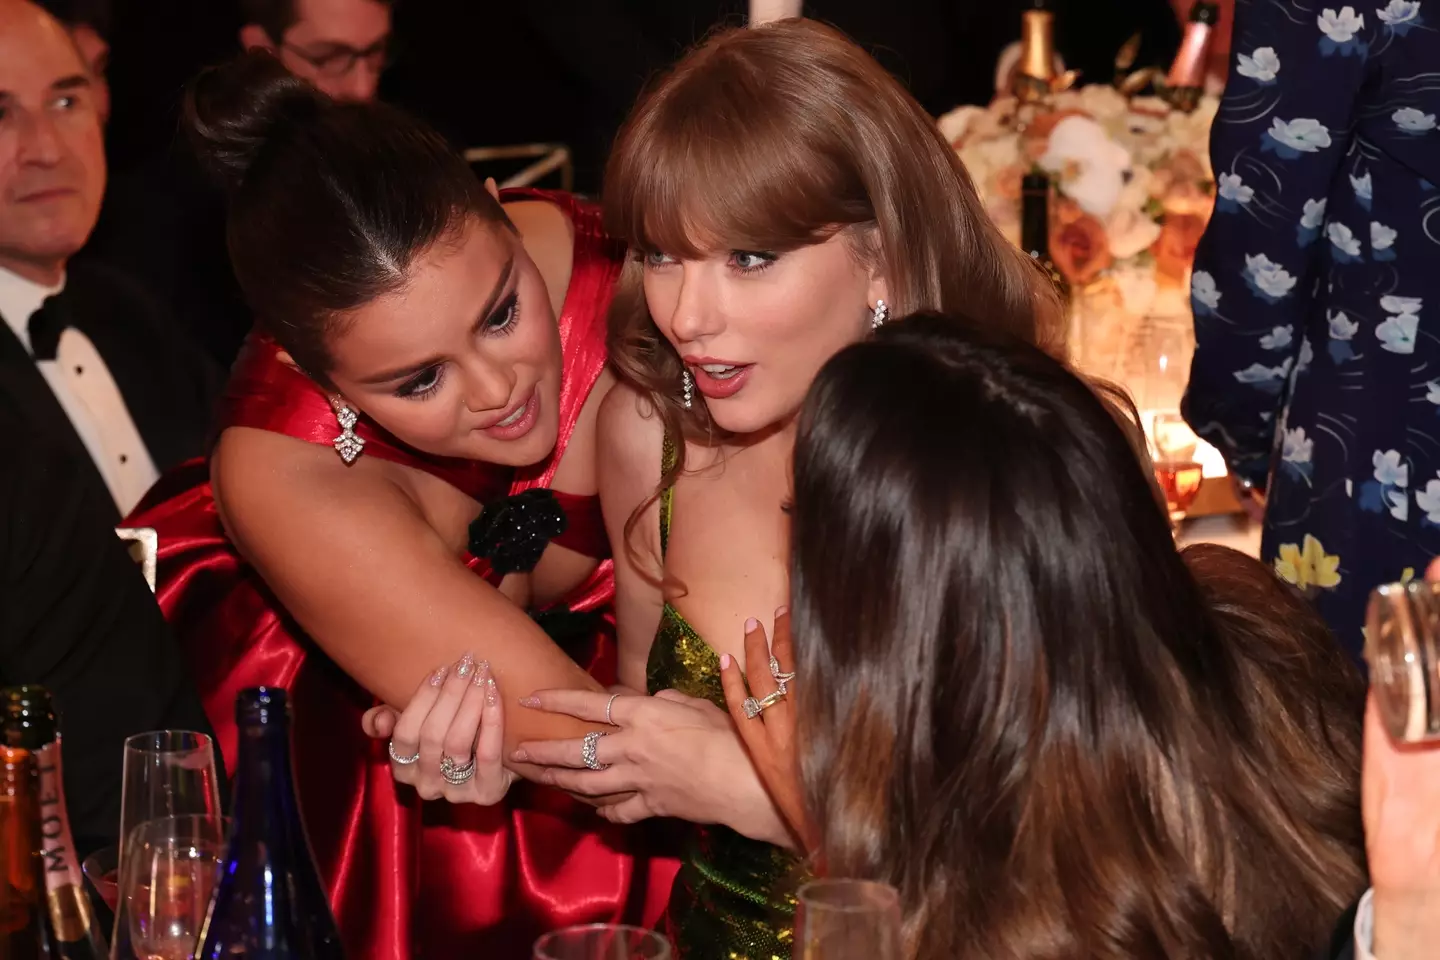 The moment Selena Gomez shared the tea with Taylor Swift was caught on camera.